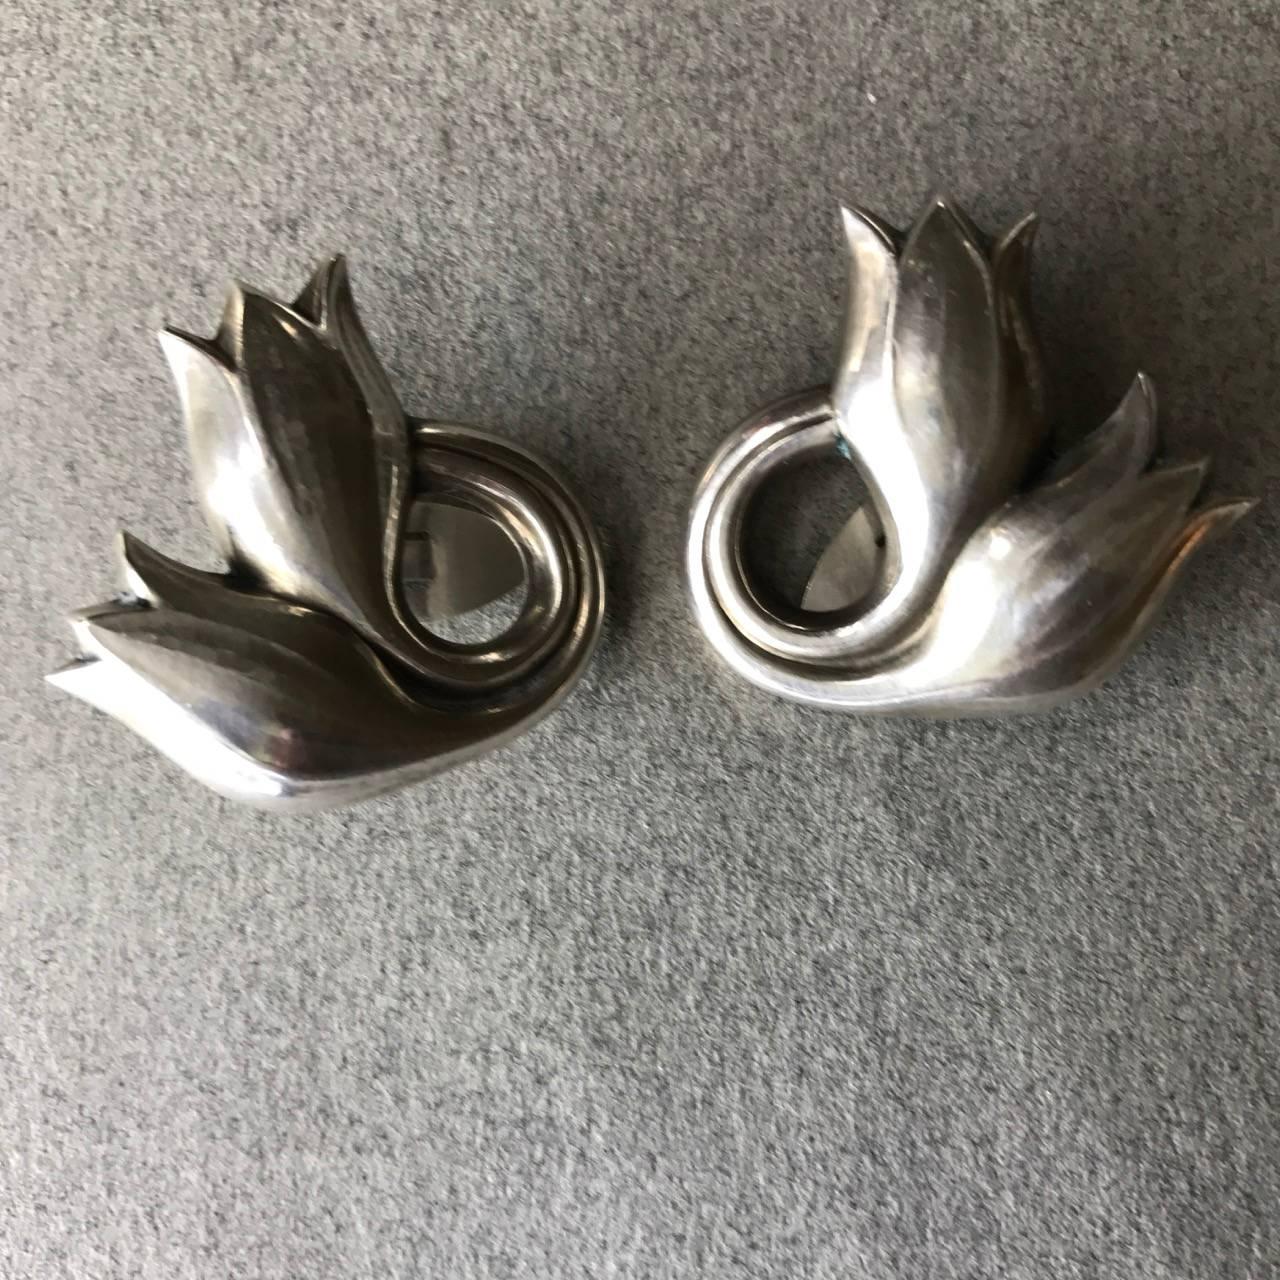 Georg Jensen Tulip Earrings Large size No. 100B

 

Excellent condition with visible hand hammering.

 

Comfortable clip on style.

 

Matching Brooch and bracelet available.

 

A similar example can be seen in the book, GEORG JENSEN JEWELRY by